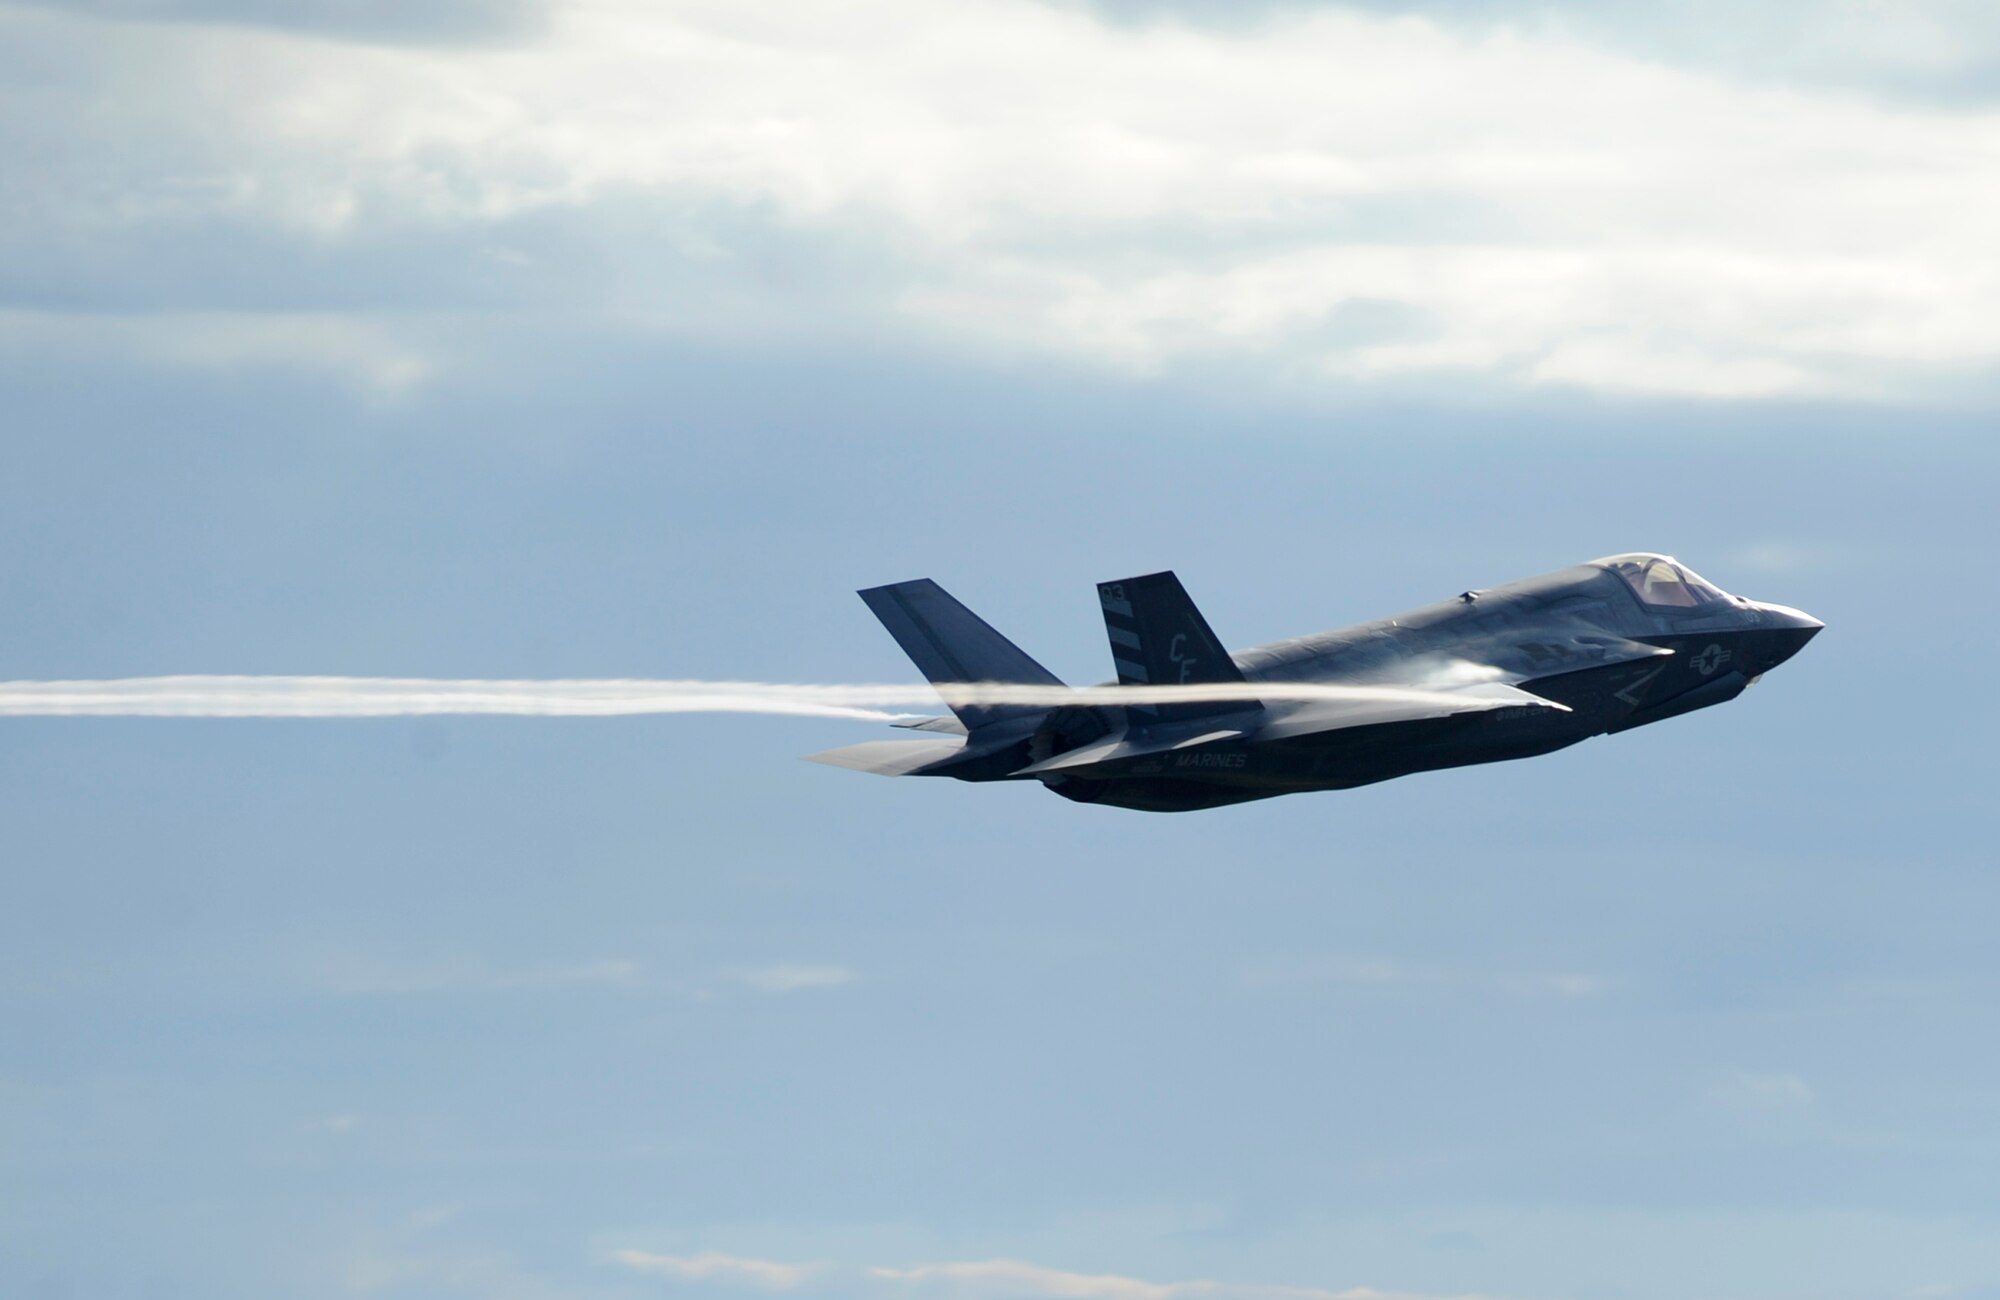 A U.S. Marine F-35 Lightning II from the Marine Fighter Attack Squadron (VMRA) 211, takes off during a 53rd Weapon Evaluation Group Weapon System Evaluation Program from the Tyndall flightline Sept. 16, 2016. This WSEP marked Marine Fighter Attack Squadron 211’s first deployment since standing up the unit on June 30, and was the first operational F-35 firing of a live air-to-air missile (during Combat Archer). (U.S. Air Force photo by Senior Airman Solomon Cook/Released)